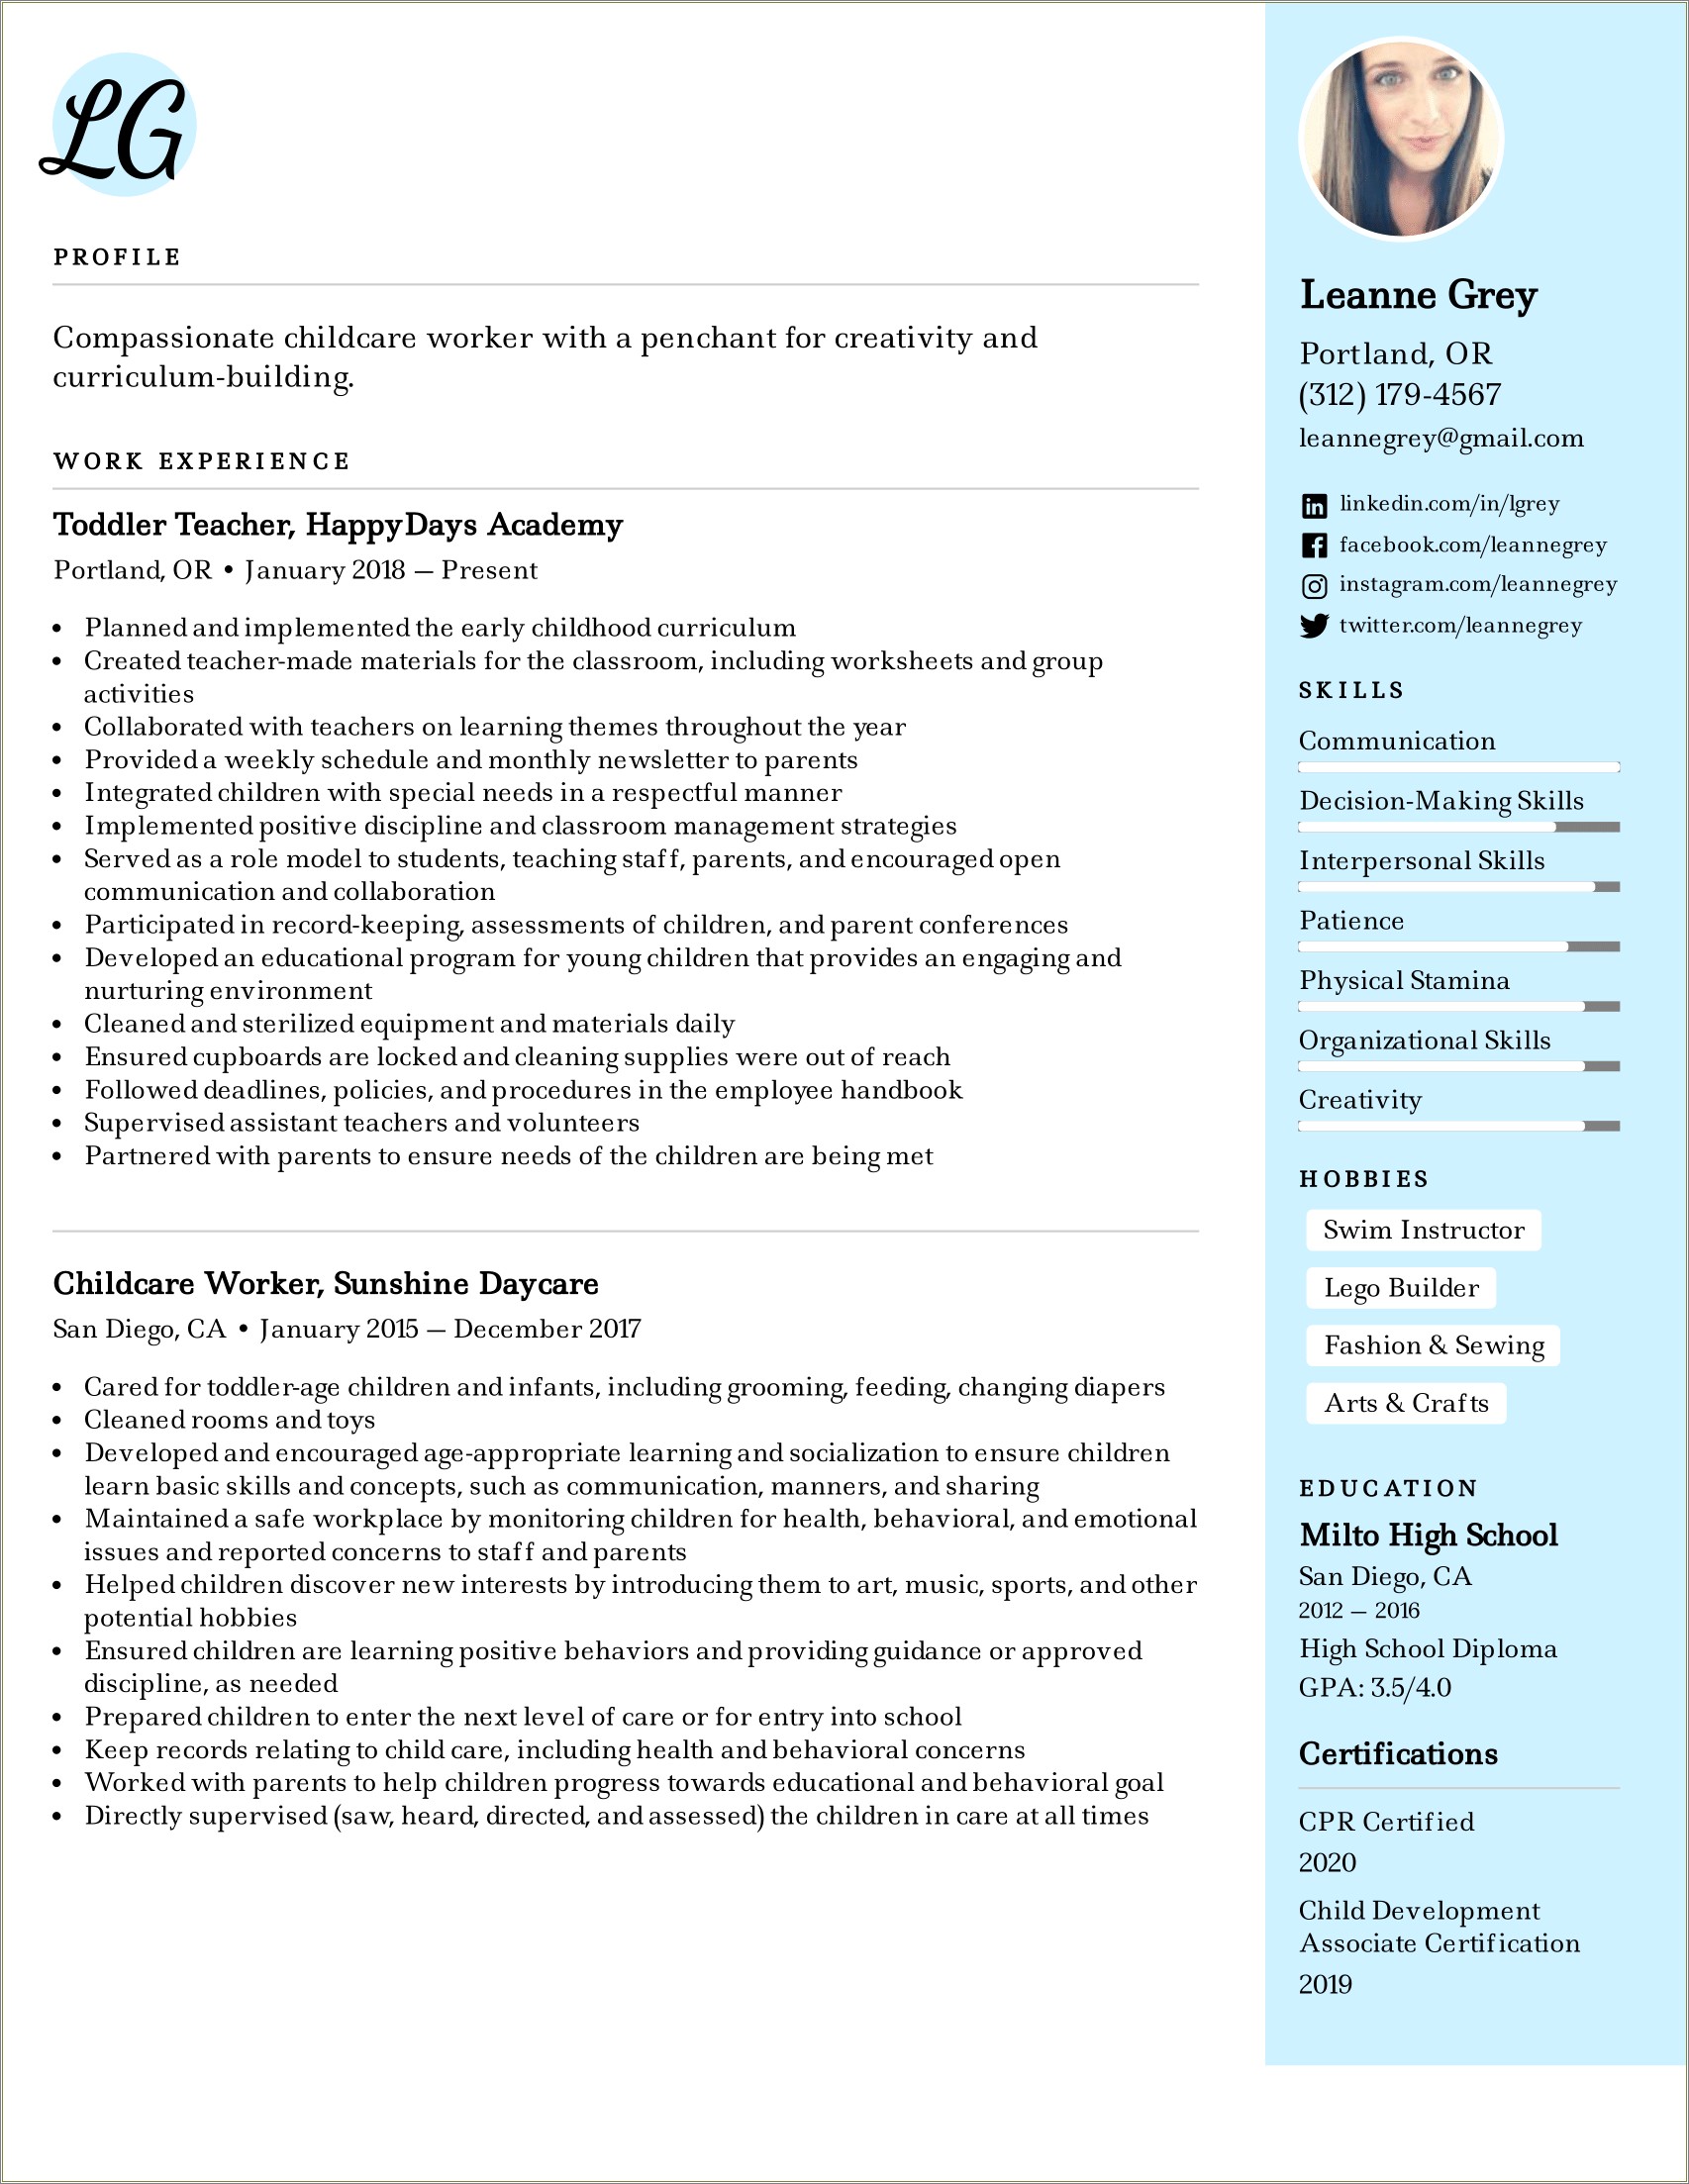 Educational Skills And Abilities Listed On Resume